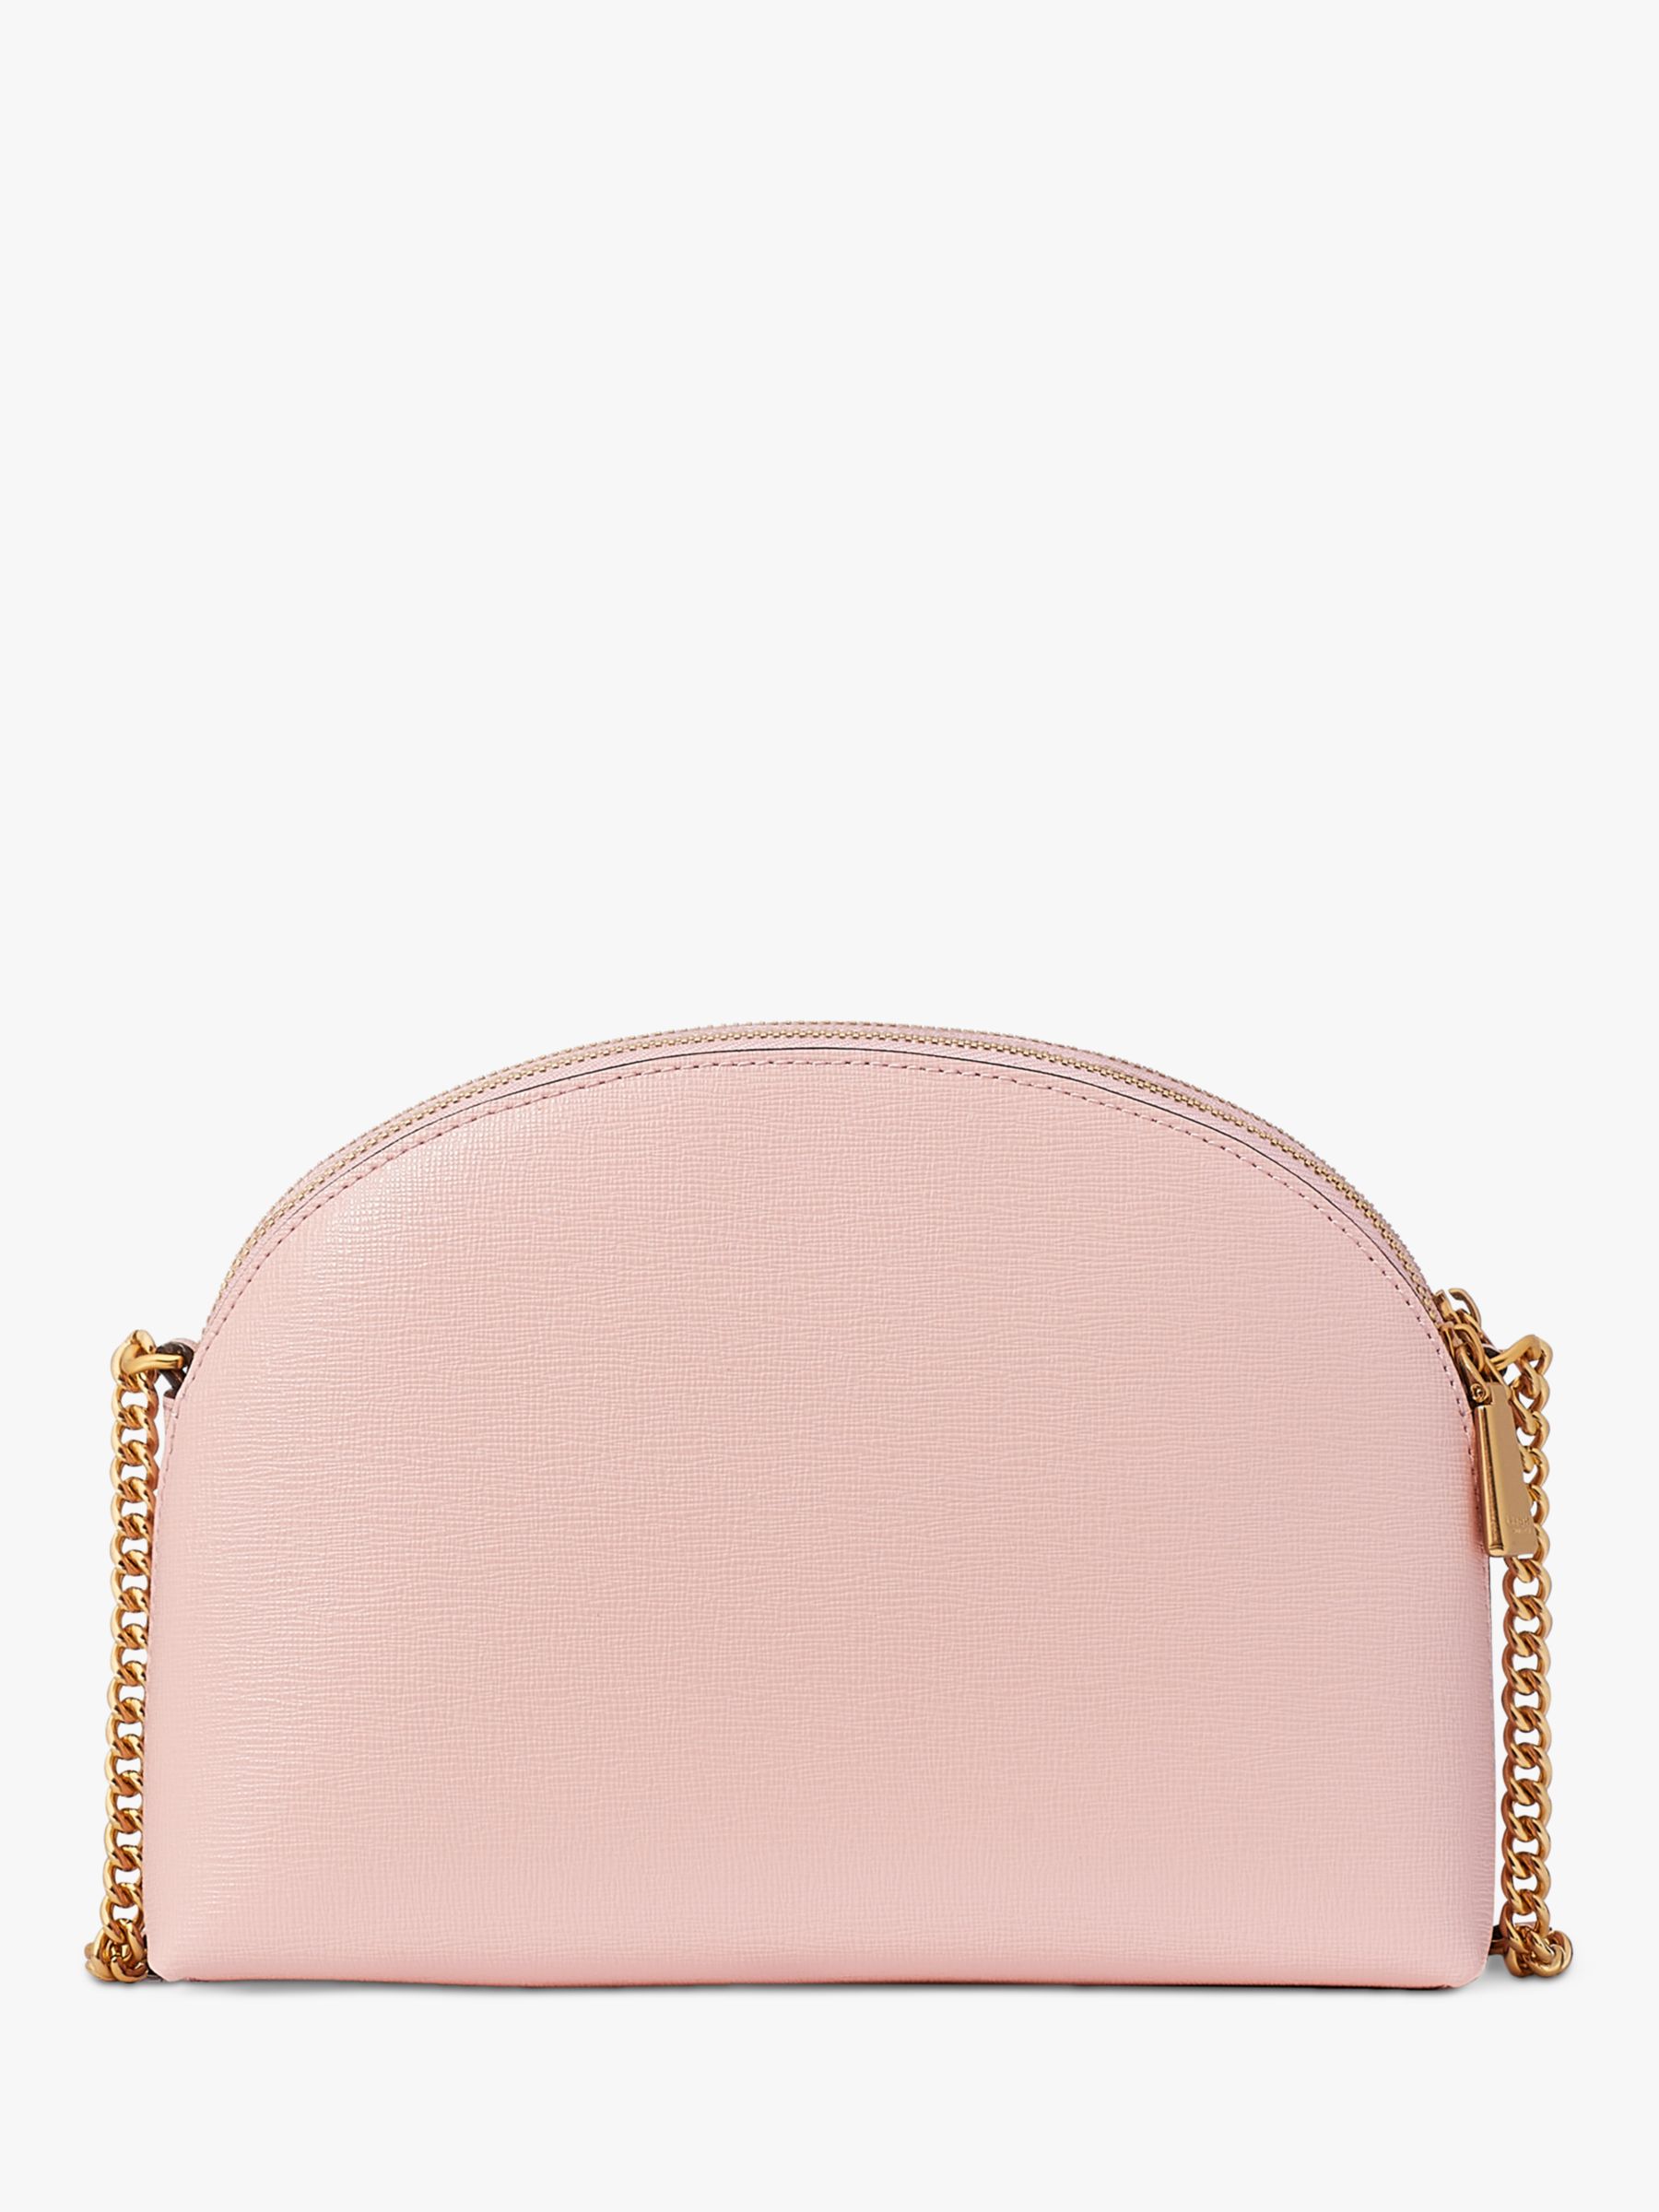 Buy kate spade new york Morgan Dome Leather Double Zip Cross Body Bag Online at johnlewis.com